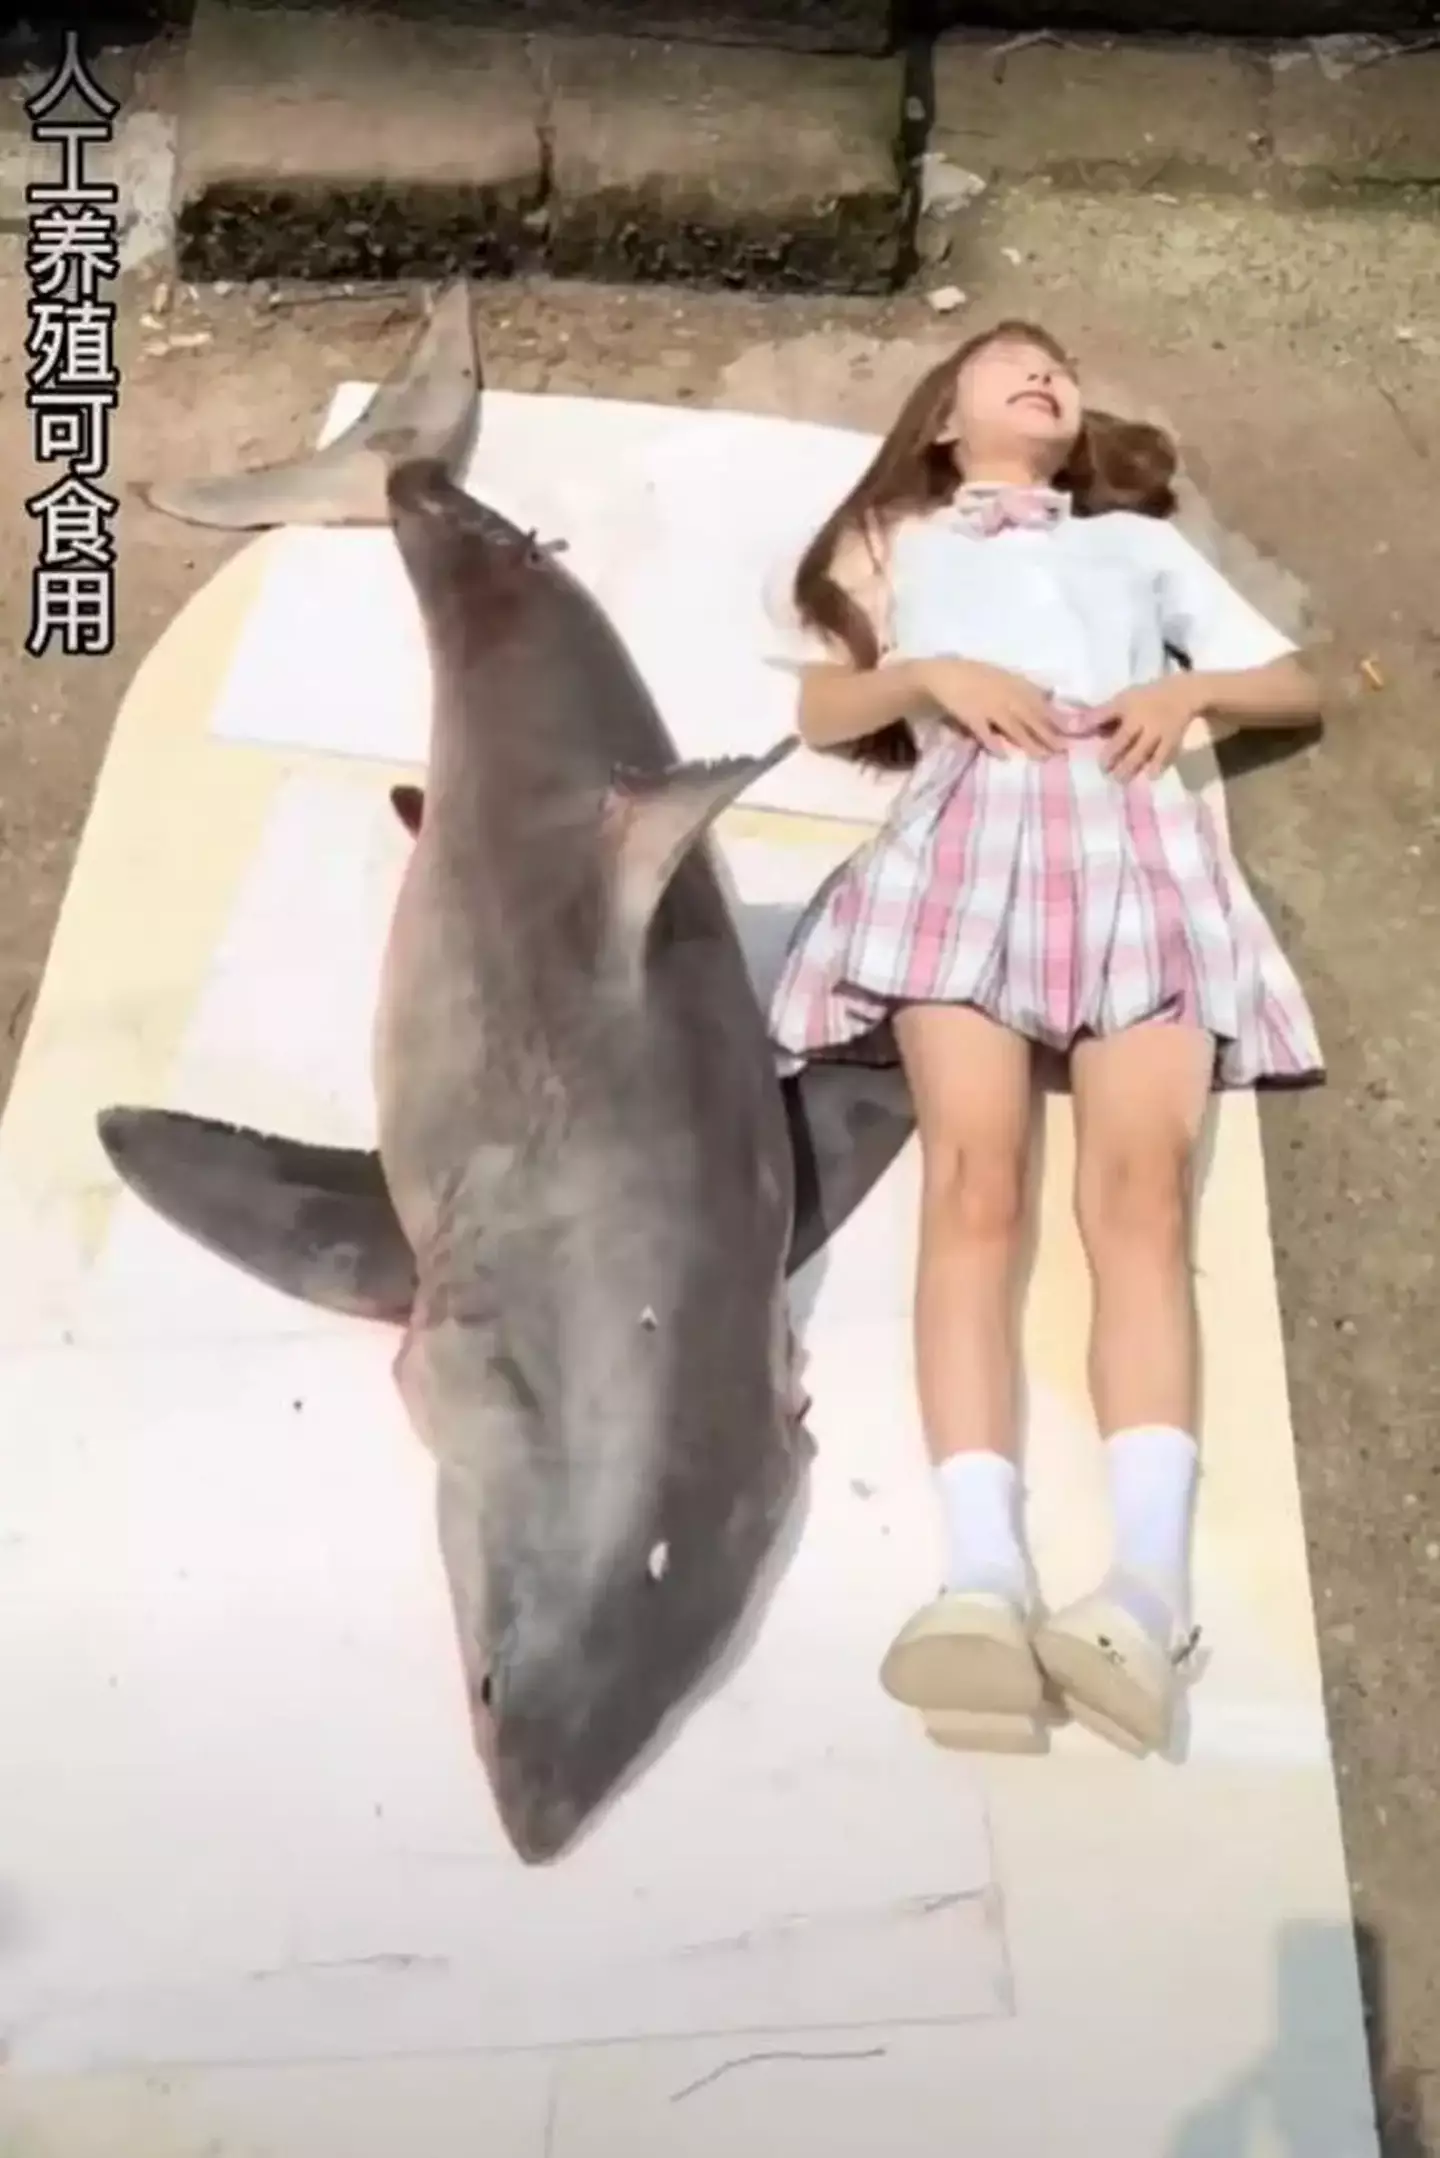 The influencer shared a clip of her preparing and eating the shark last summer.